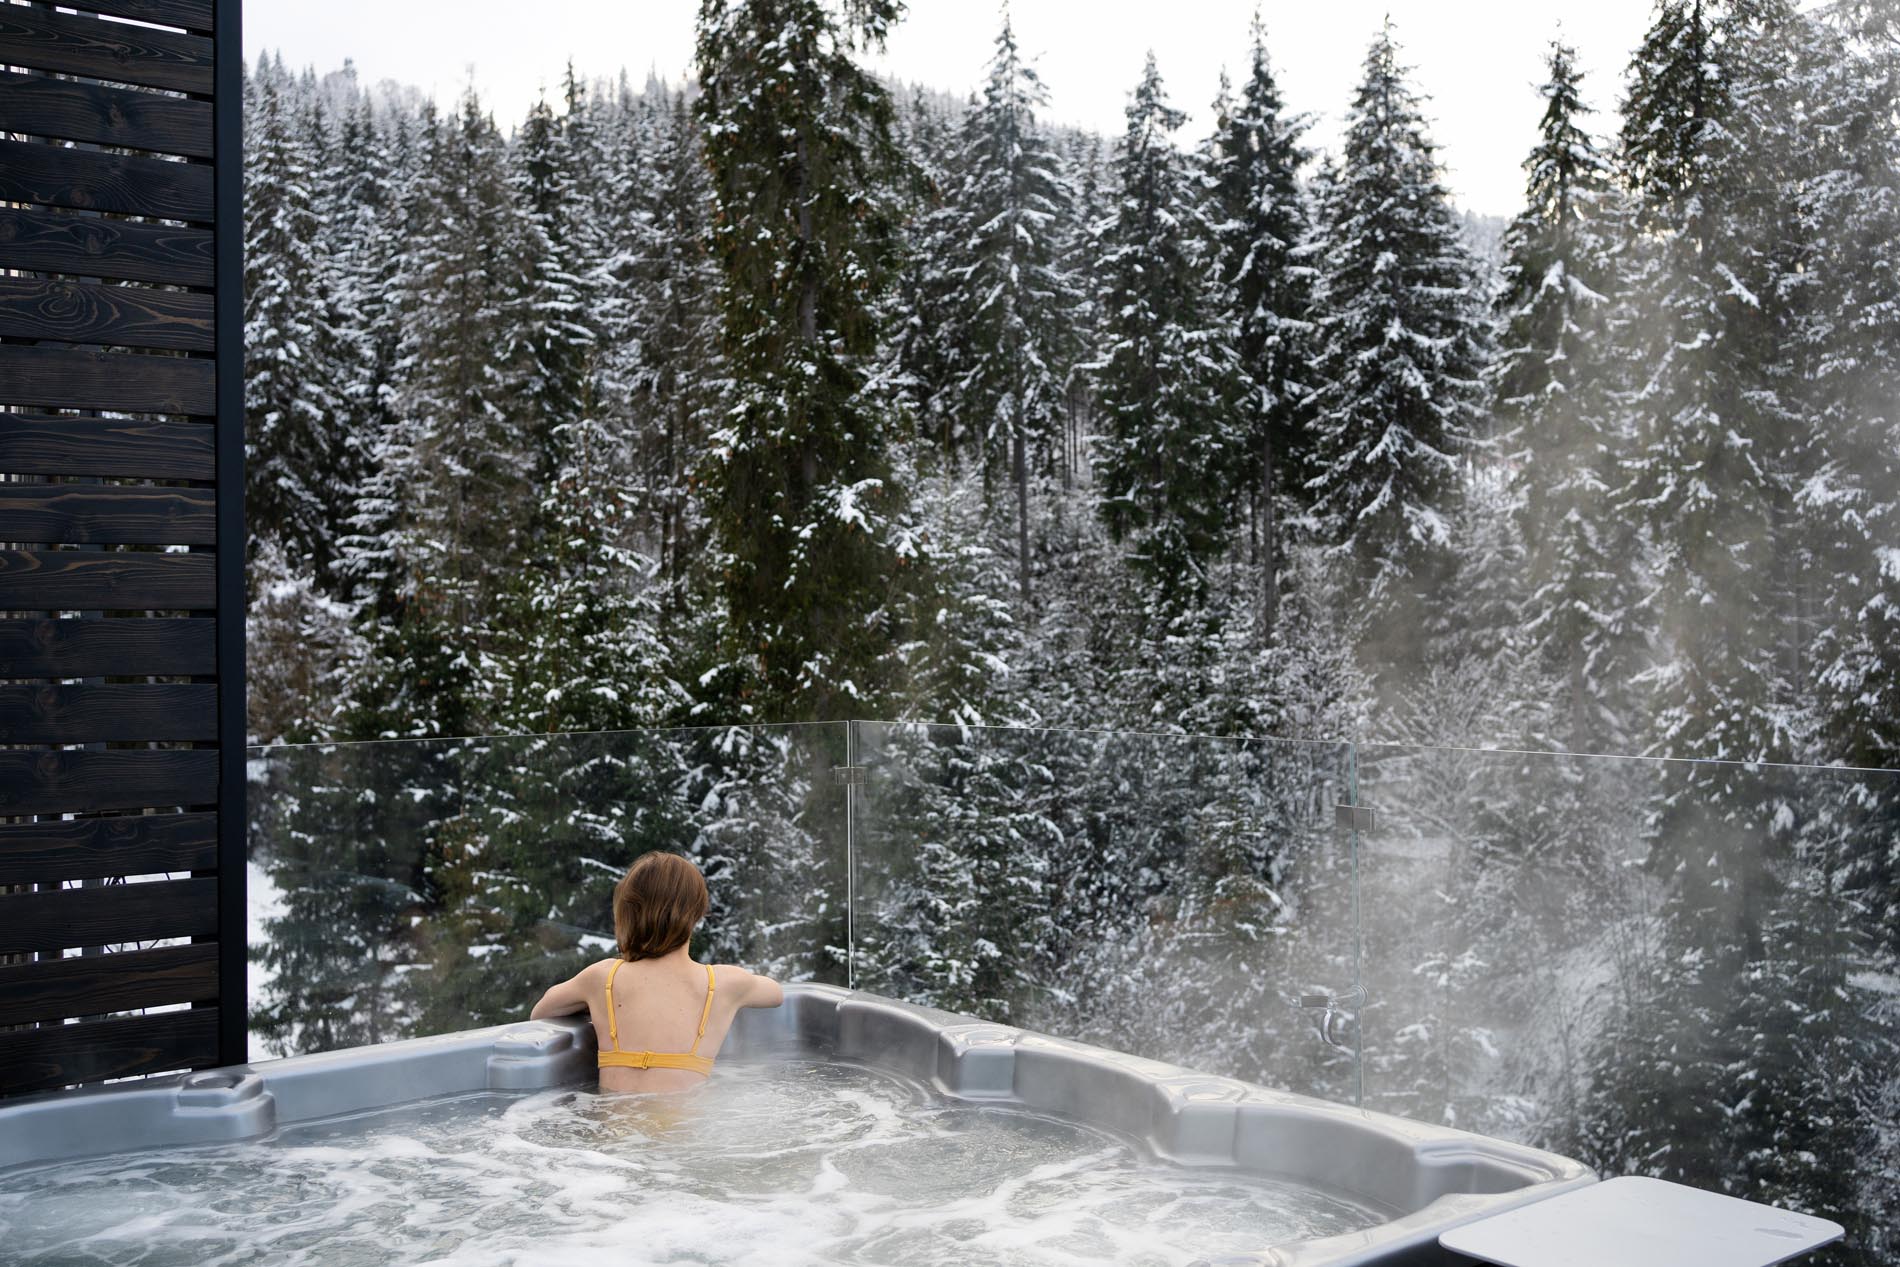 A young woman relaxes in a hot tub with a jacuzzi in the winter outdoors, sitting on back and enjoying the view of the snowy forest. Concept of winter rest in hot bath on nature